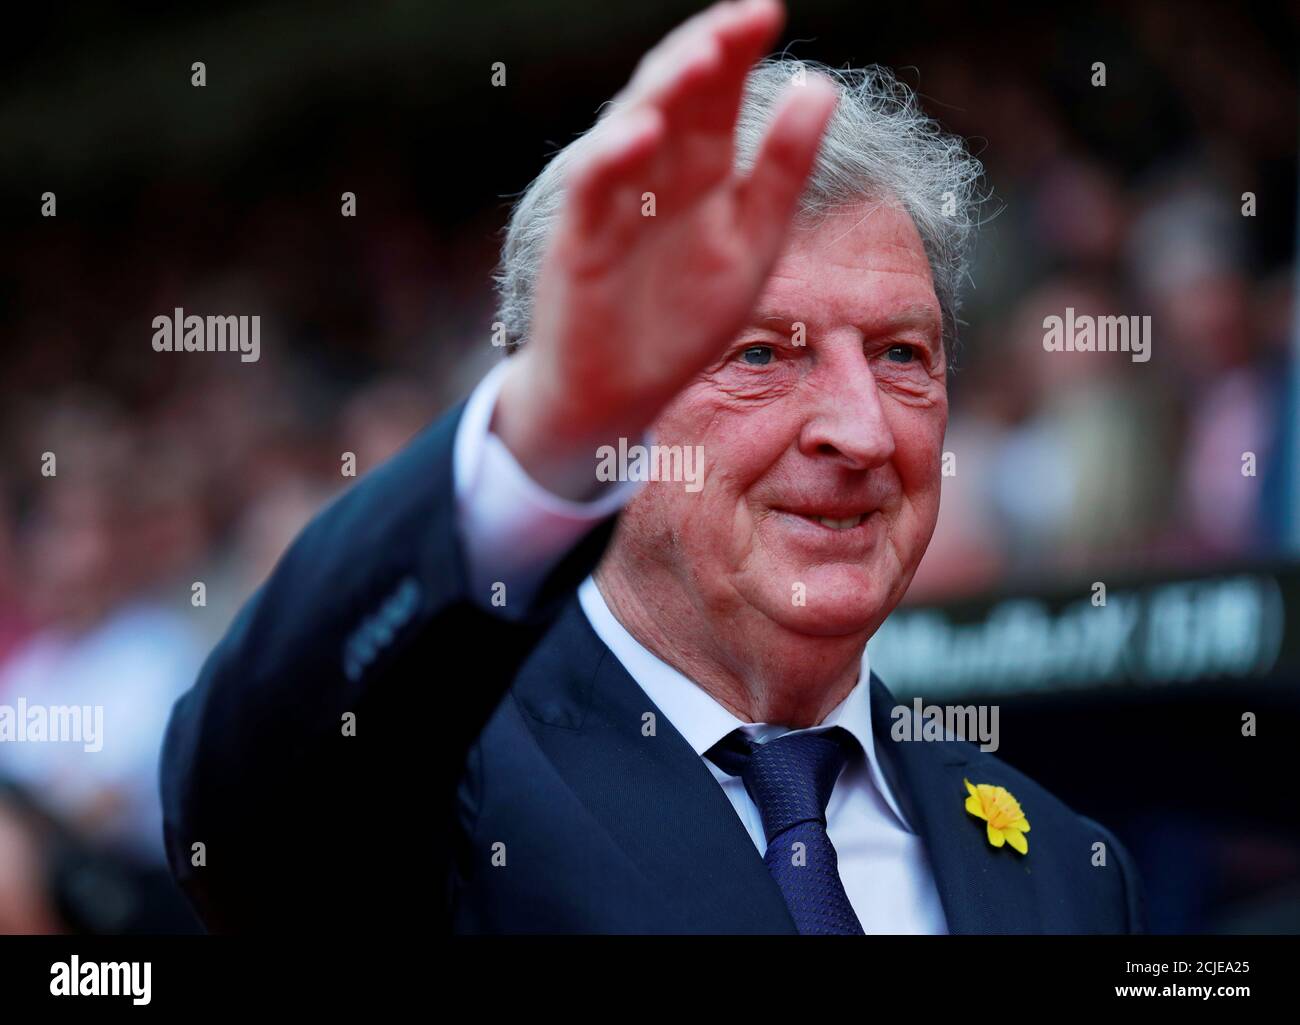 Soccer Football - Premier League - Crystal Palace v Huddersfield Town - Selhurst Park, London, Britain - March 30, 2019  Crystal Palace manager Roy Hodgson before the match     Action Images via Reuters/Andrew Couldridge  EDITORIAL USE ONLY. No use with unauthorized audio, video, data, fixture lists, club/league logos or 'live' services. Online in-match use limited to 75 images, no video emulation. No use in betting, games or single club/league/player publications.  Please contact your account representative for further details. Stock Photo